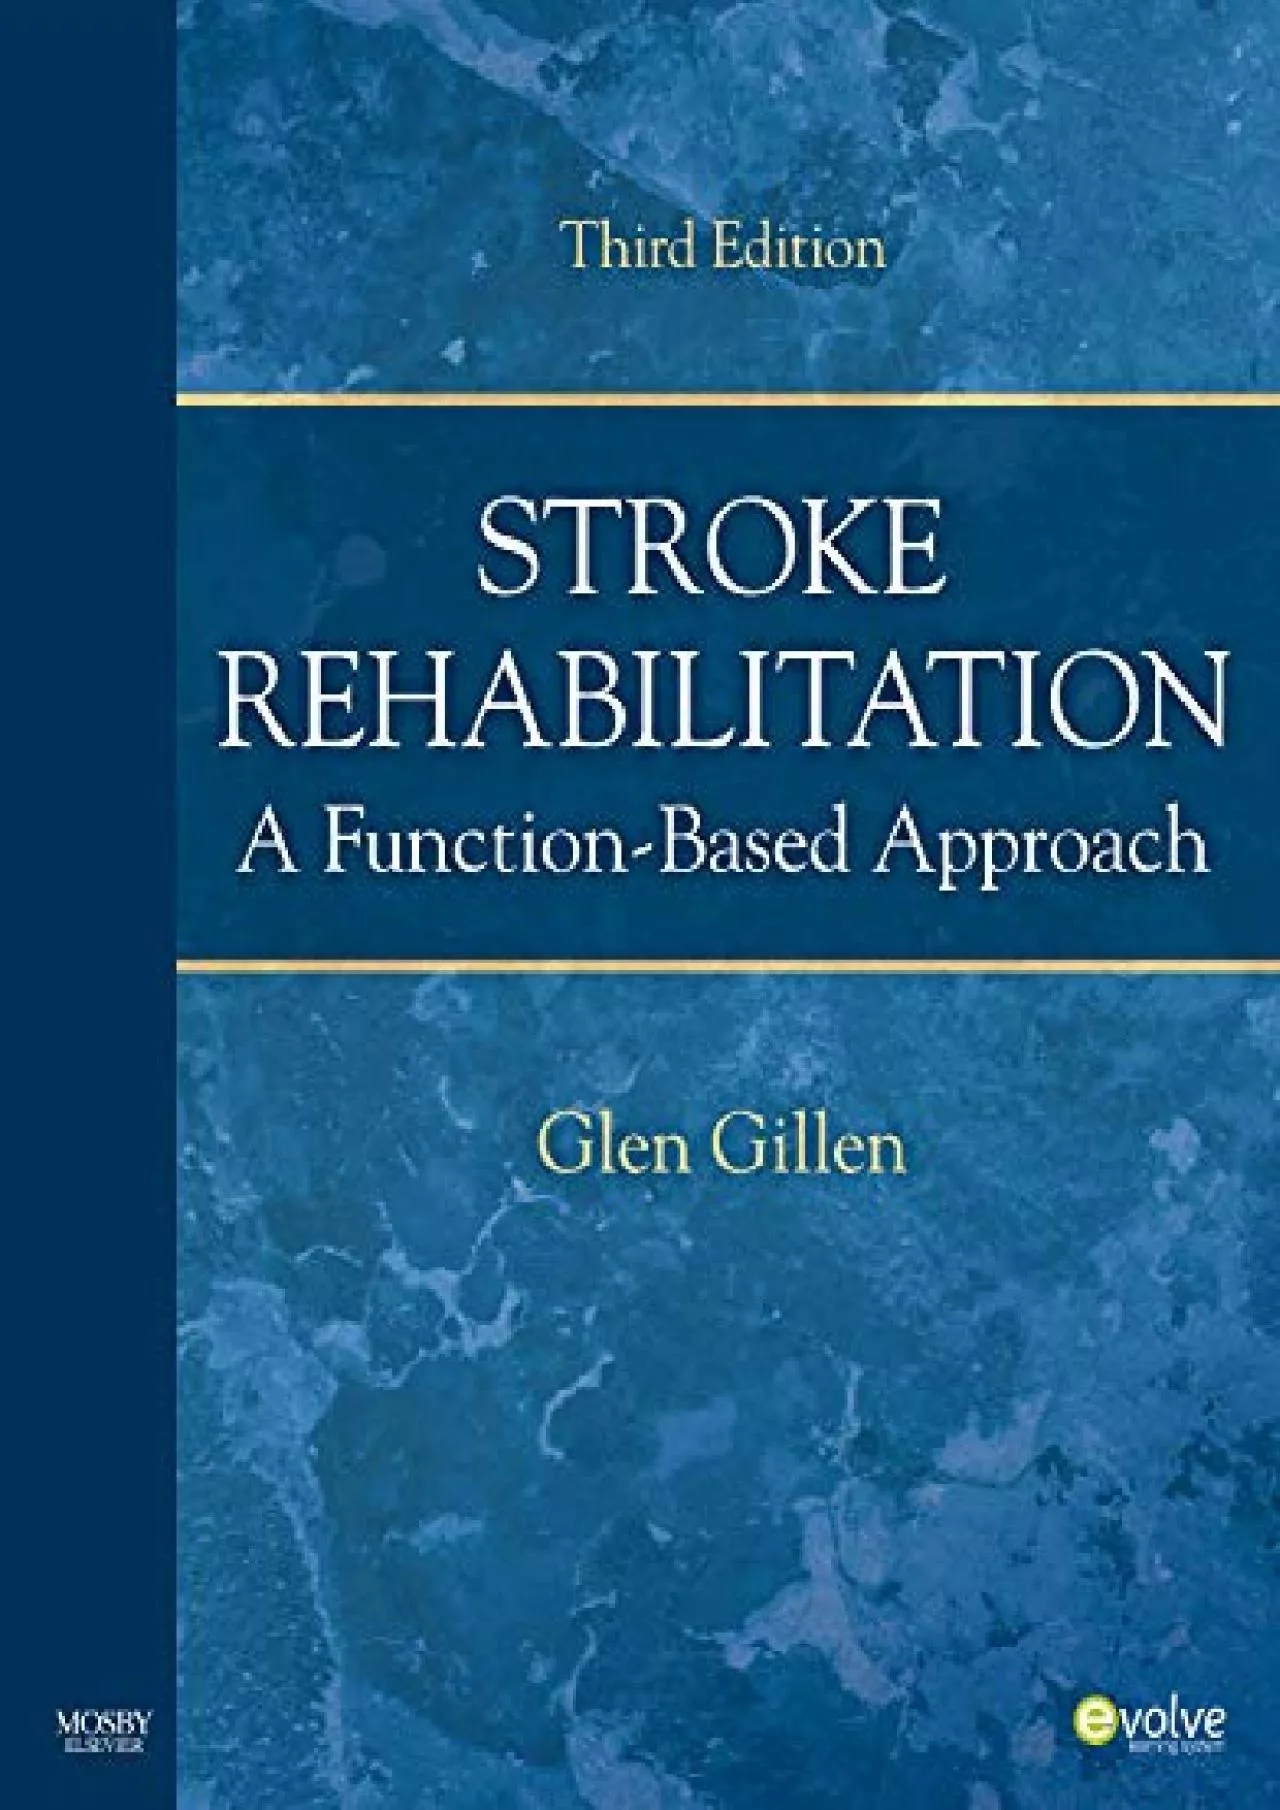 (DOWNLOAD)-Stroke Rehabilitation: A Function-Based Approach